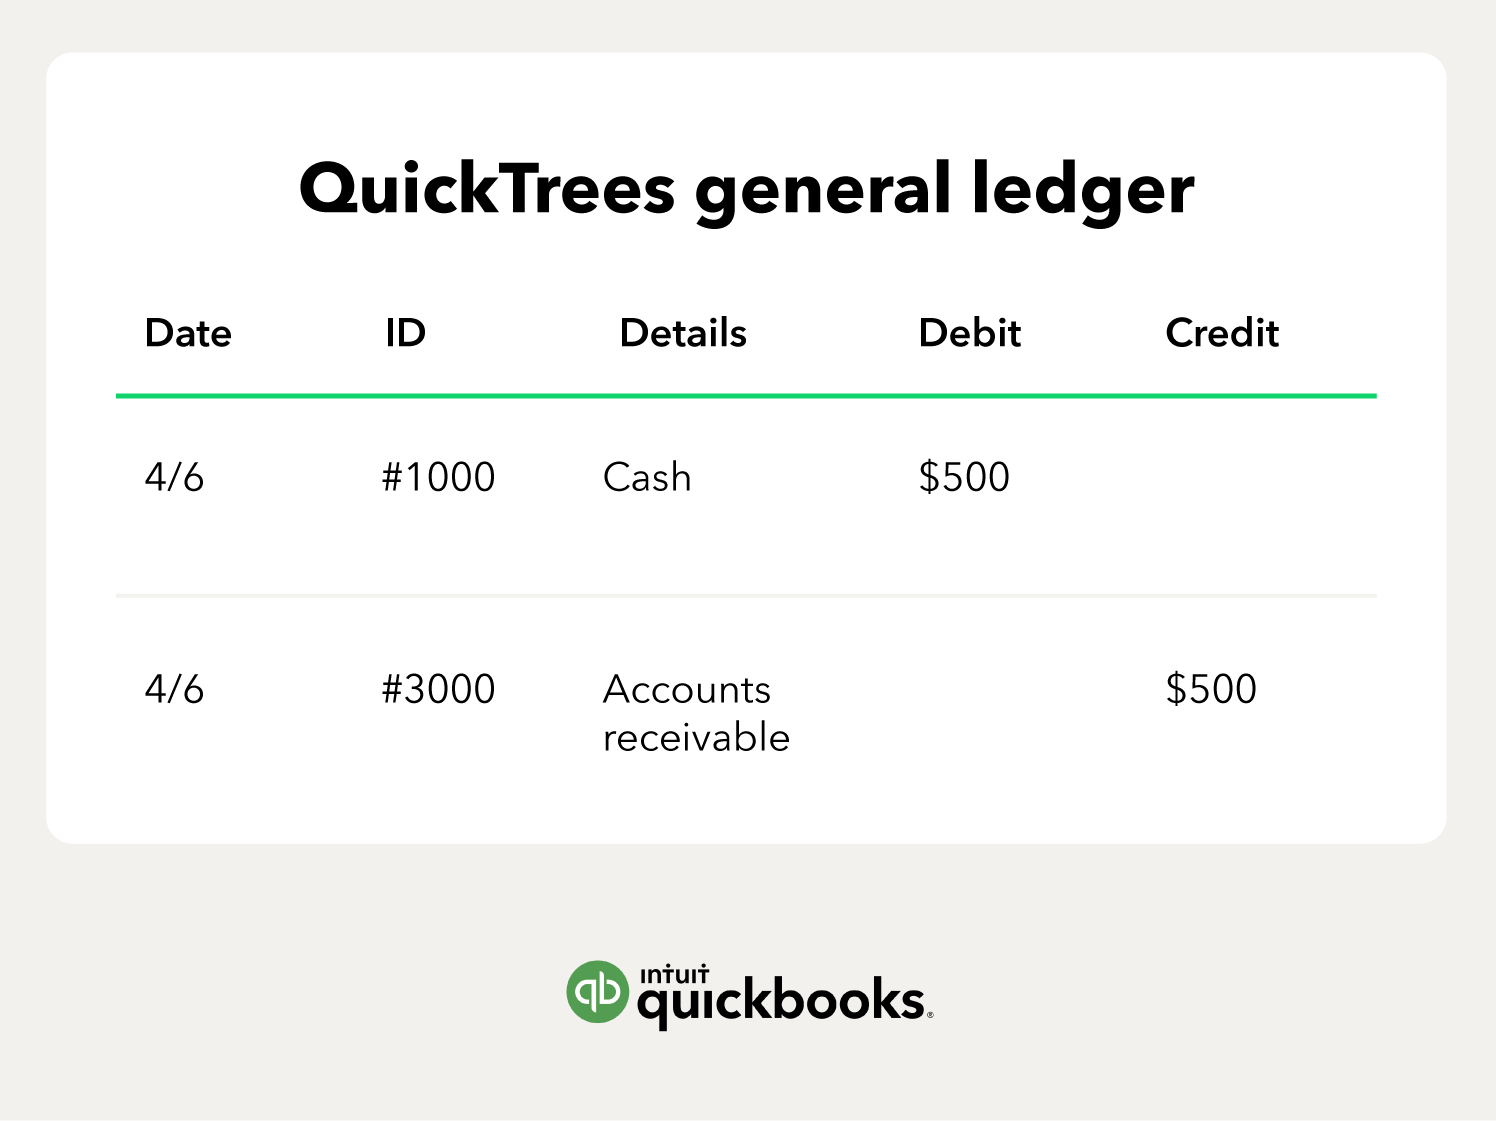 A sample general ledger for a company called QuickTrees has the columns date, ID, details, debit, and credit. Sample information is filled in the columns.